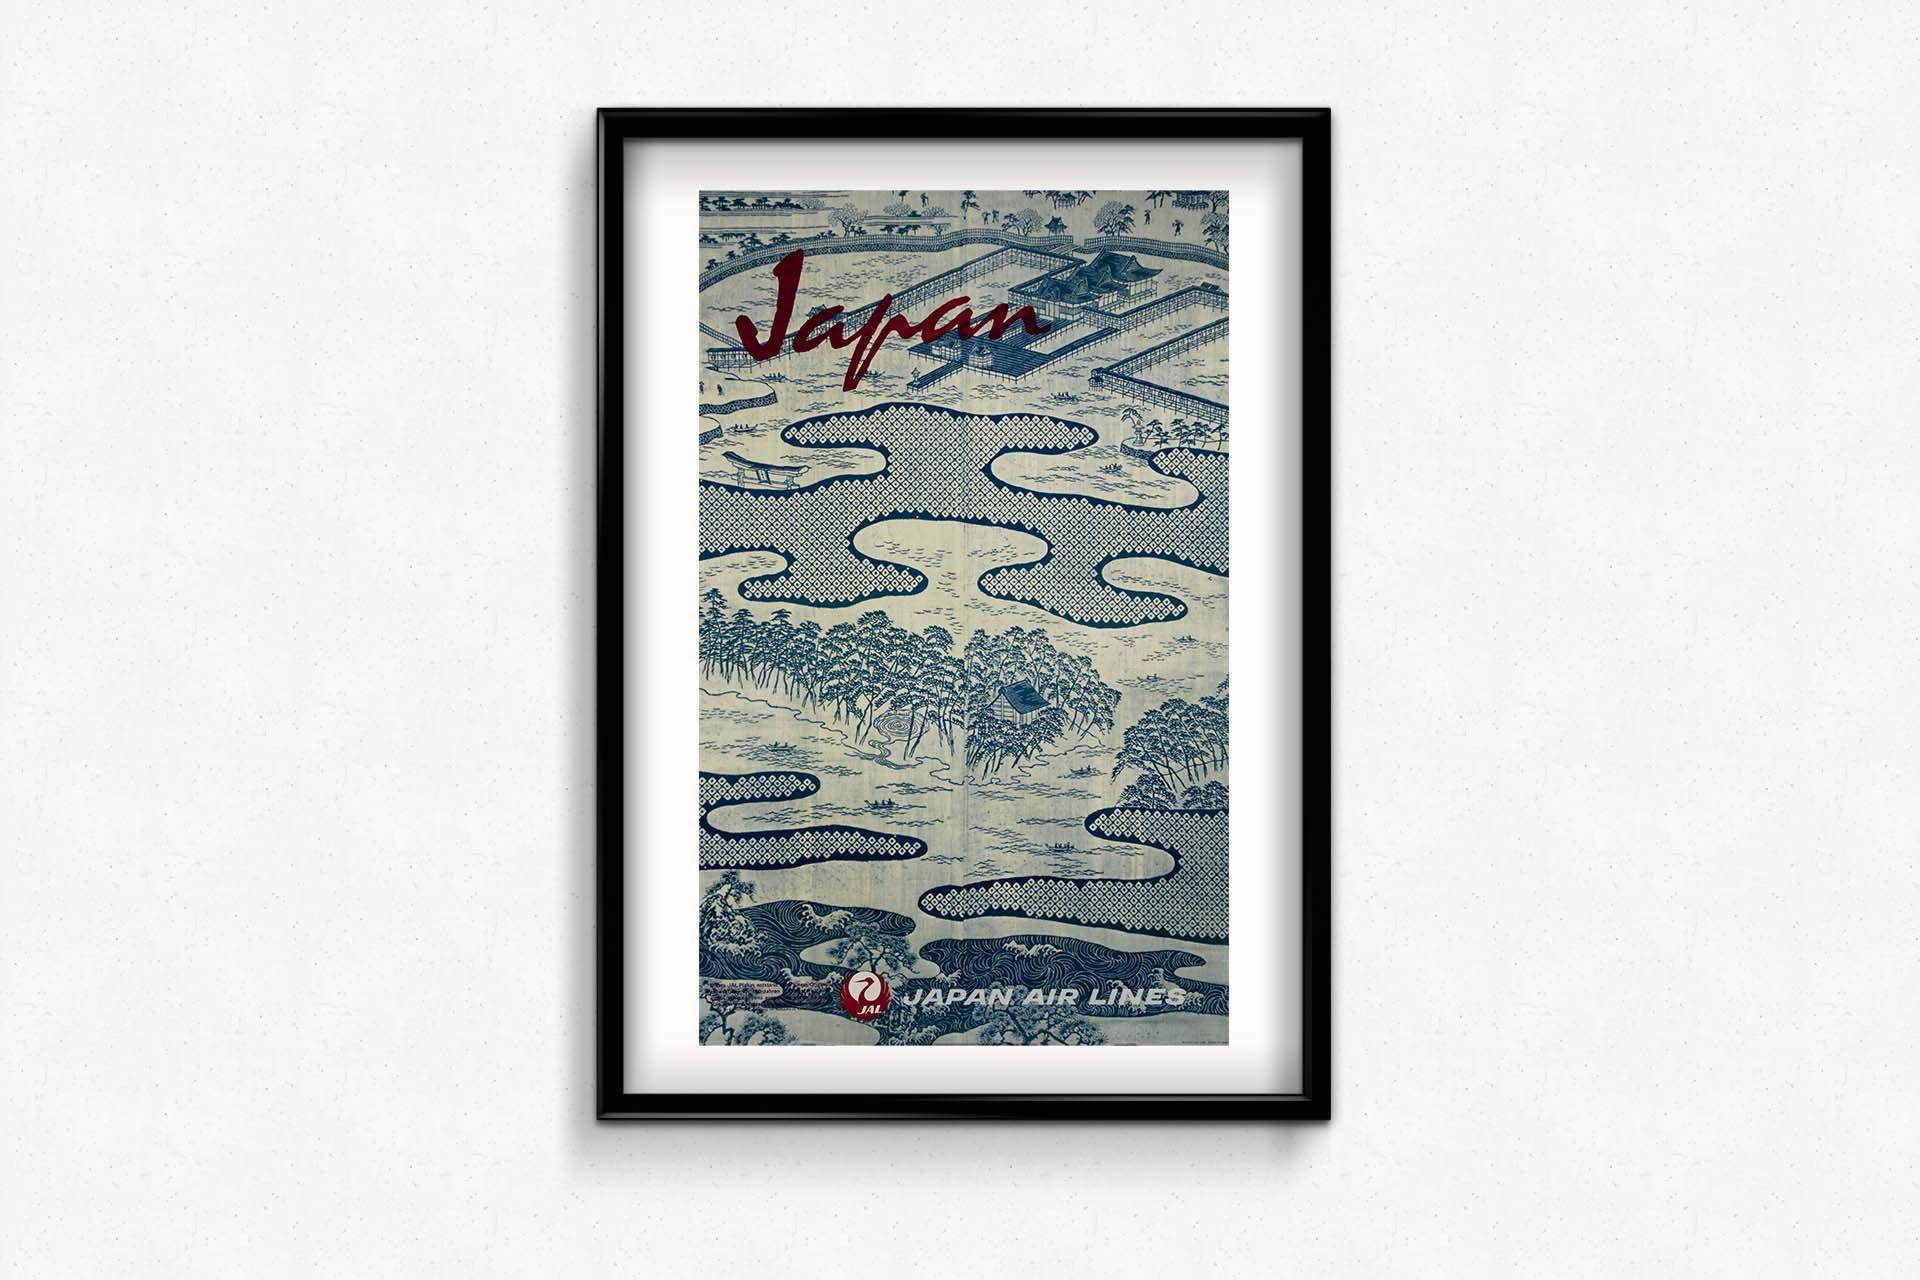 In 1964, Japan Air Lines (JAL) unveiled an original travel poster that offered a captivating glimpse into the cultural richness of Japan. The poster, focused on the traditional attire of the yukata kimono, served as an emblem of the country's